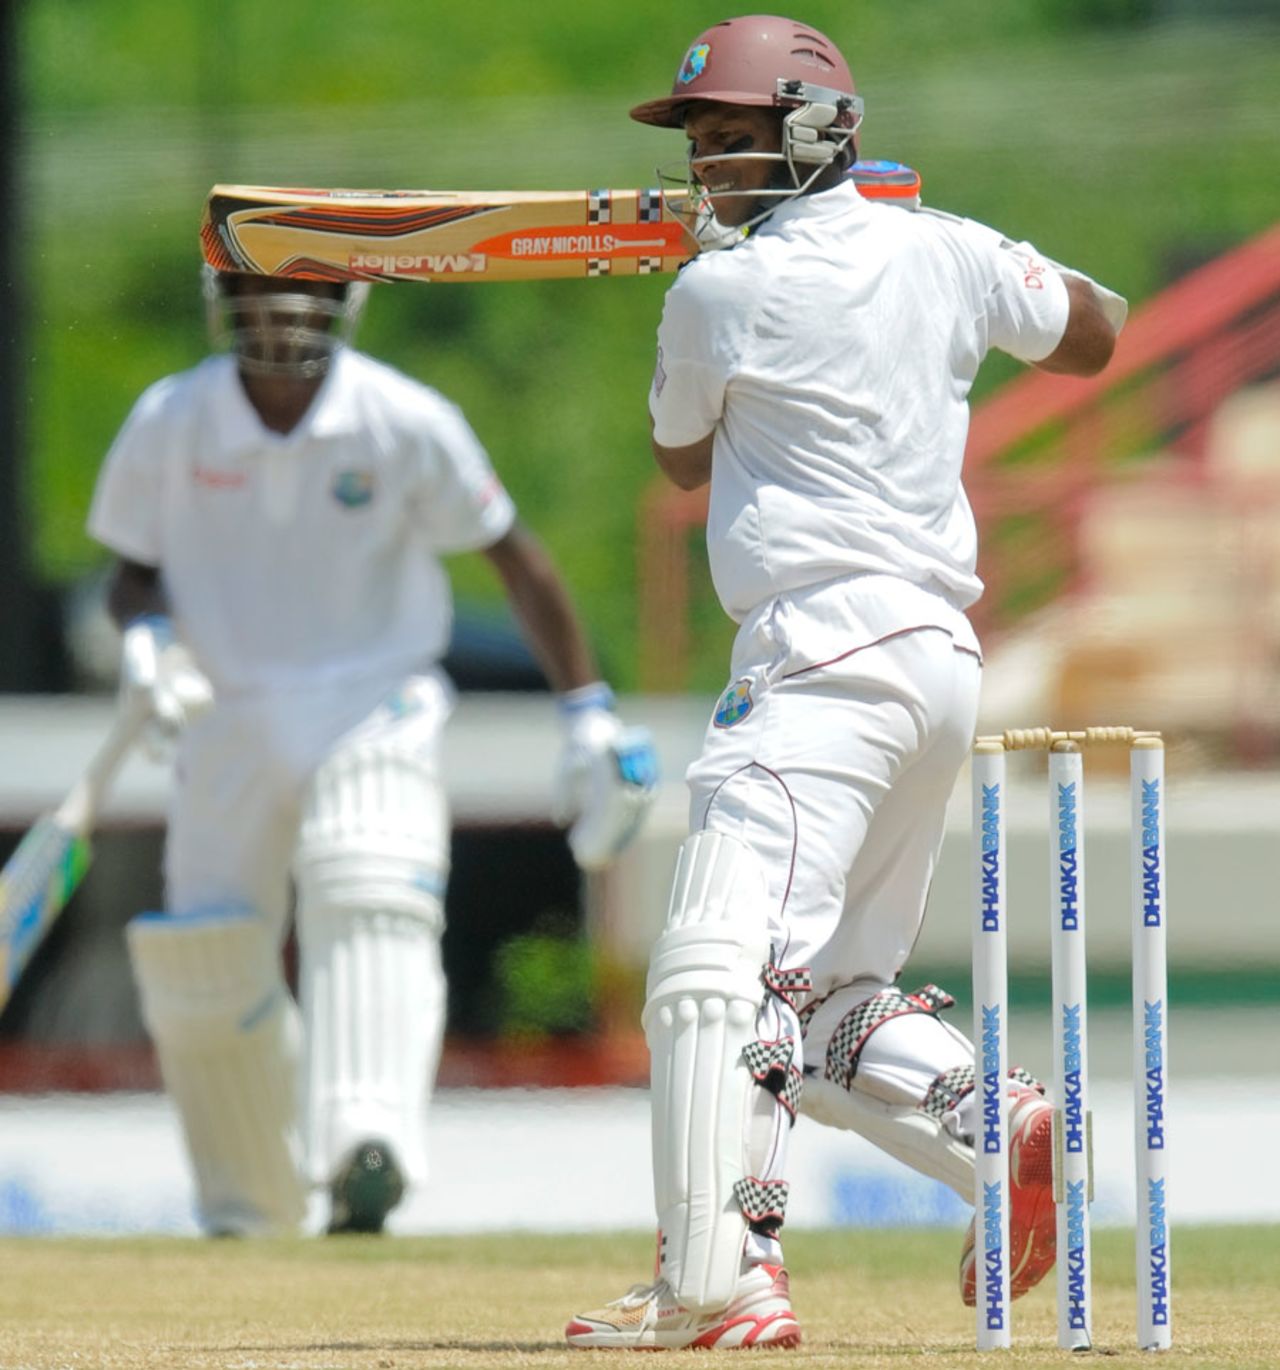 Shivnarine Chanderpaul cuts behind square, West Indies v Bangladesh, 2nd Test, St. Lucia, 4th day, September 16, 2014